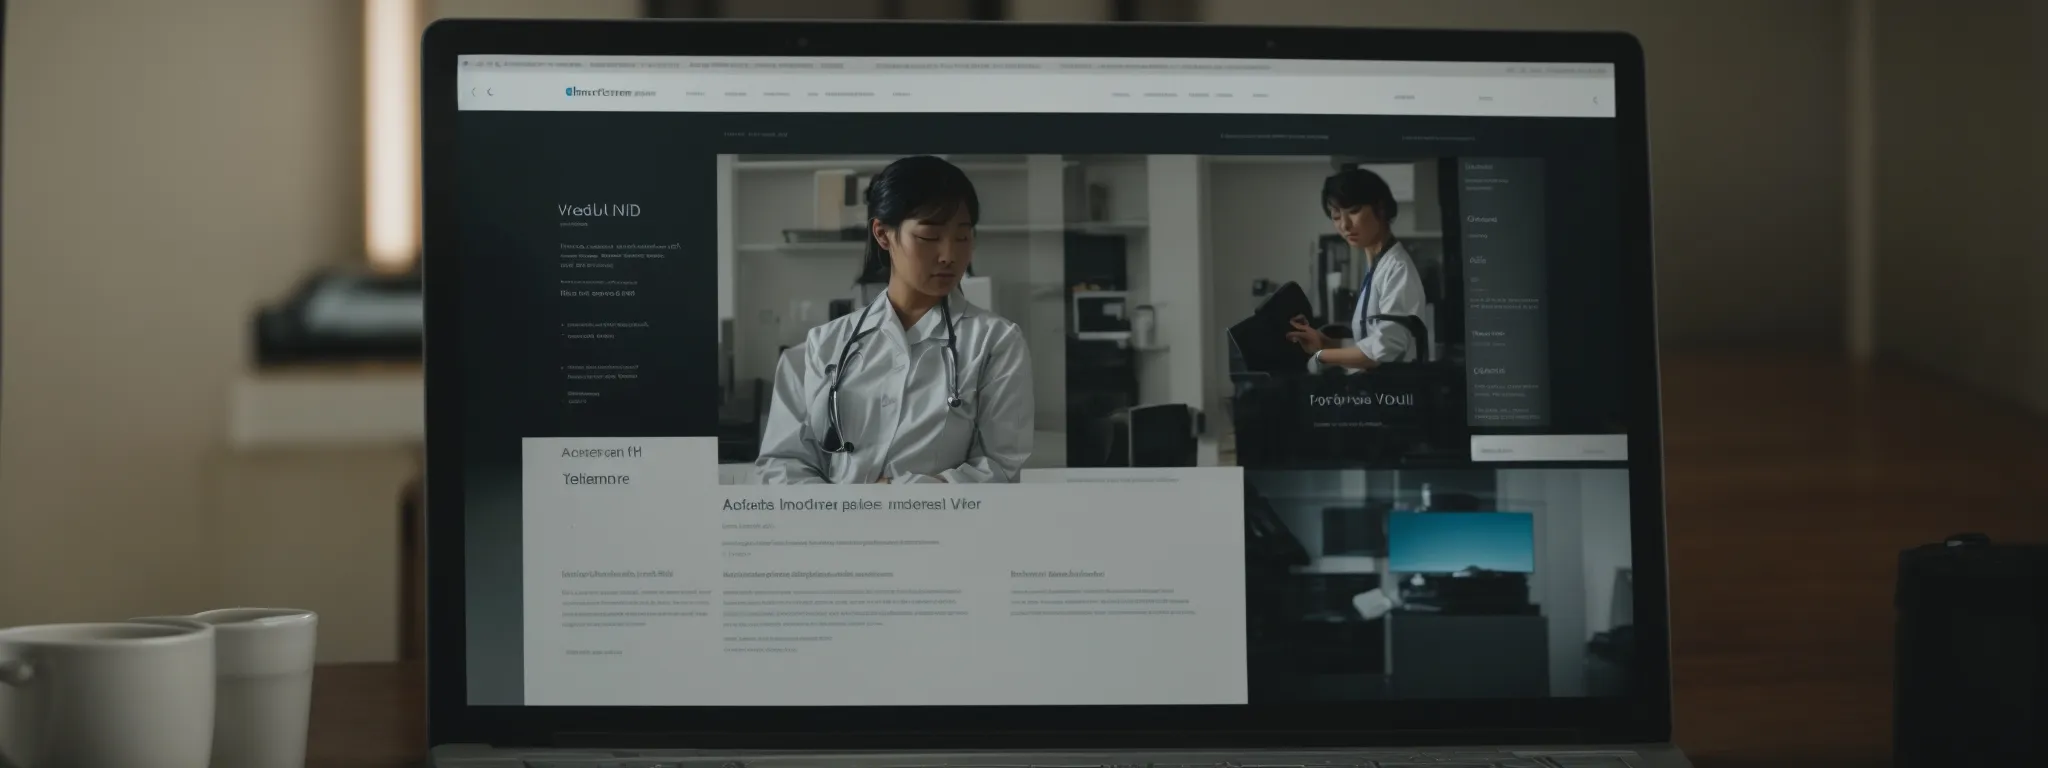 a computer screen displaying a telehealth website with a clean, structured interface, relevant medical imagery, and clear navigation menus.